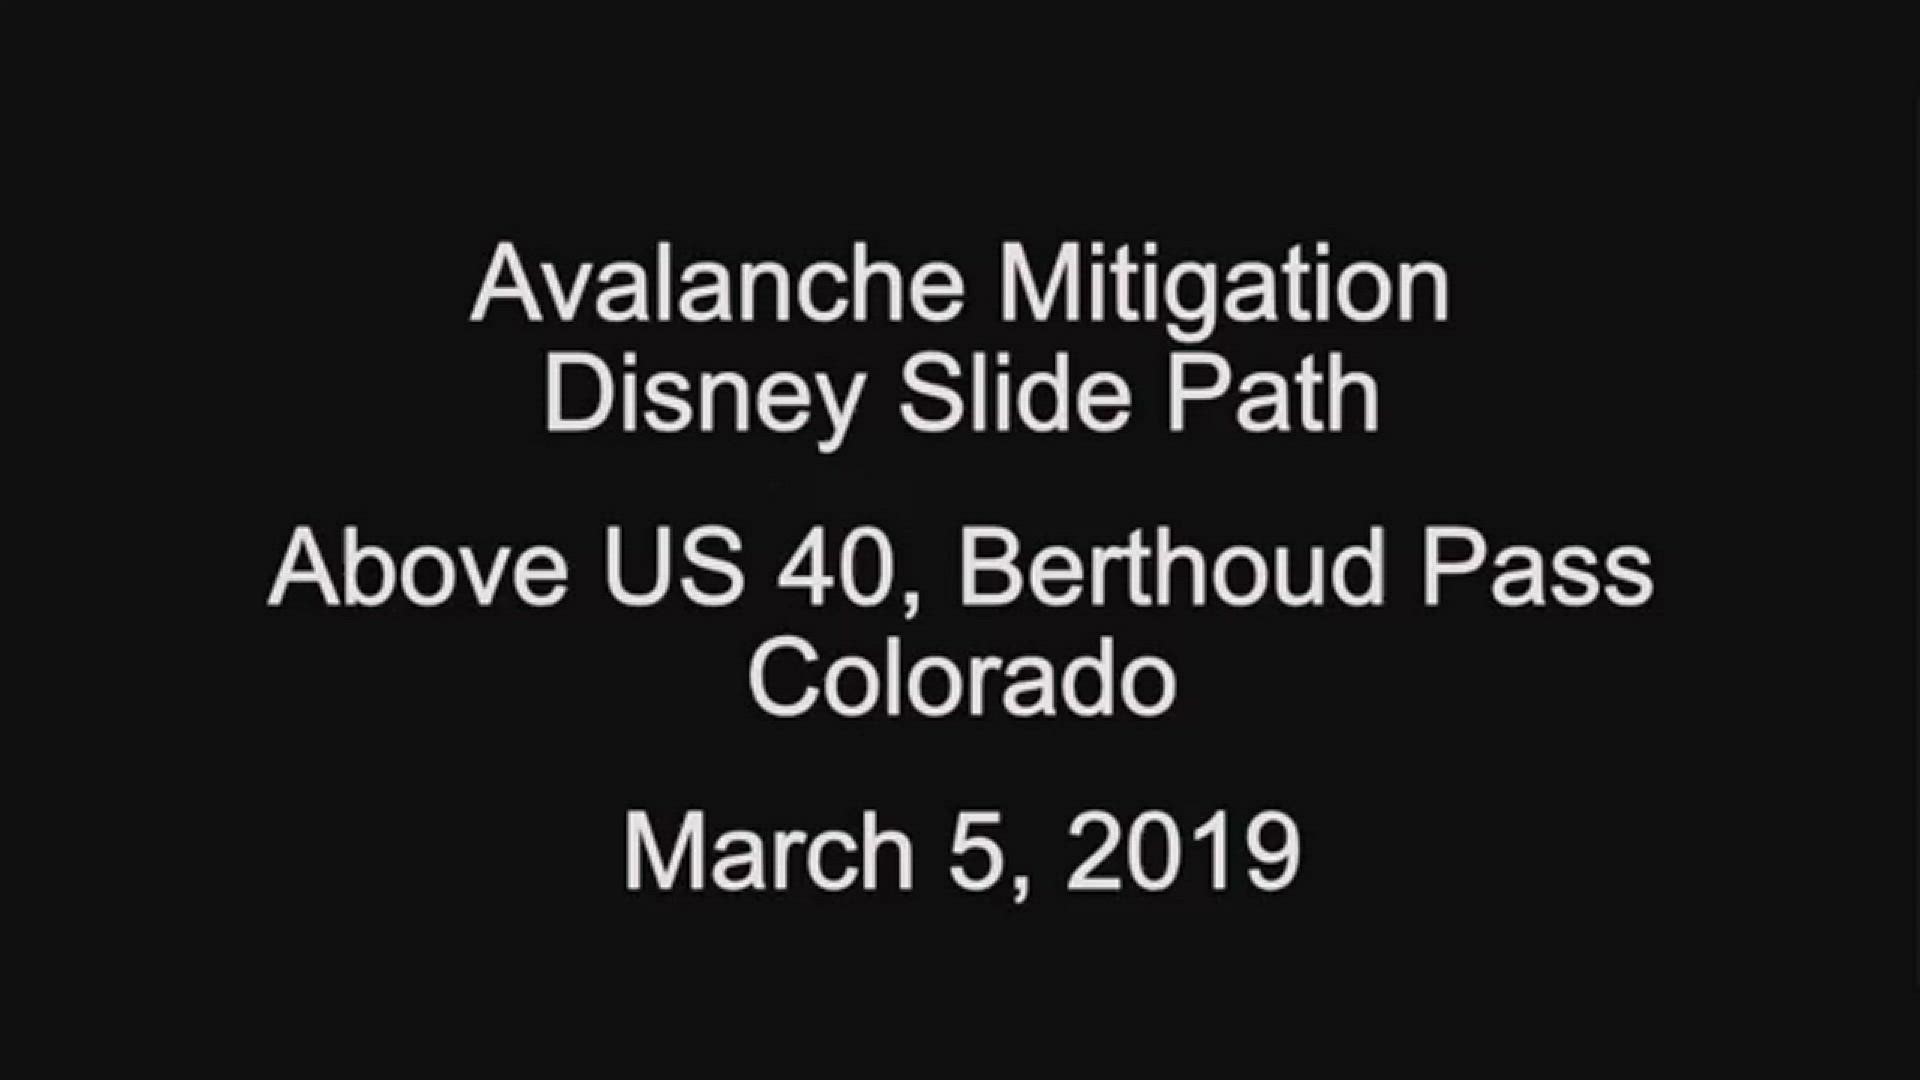 Colorado Department of Transportation crews triggered the avalanche Sunday. The subsequent slide along the Disney route caused snow to pile into the road for the first time since 1957.